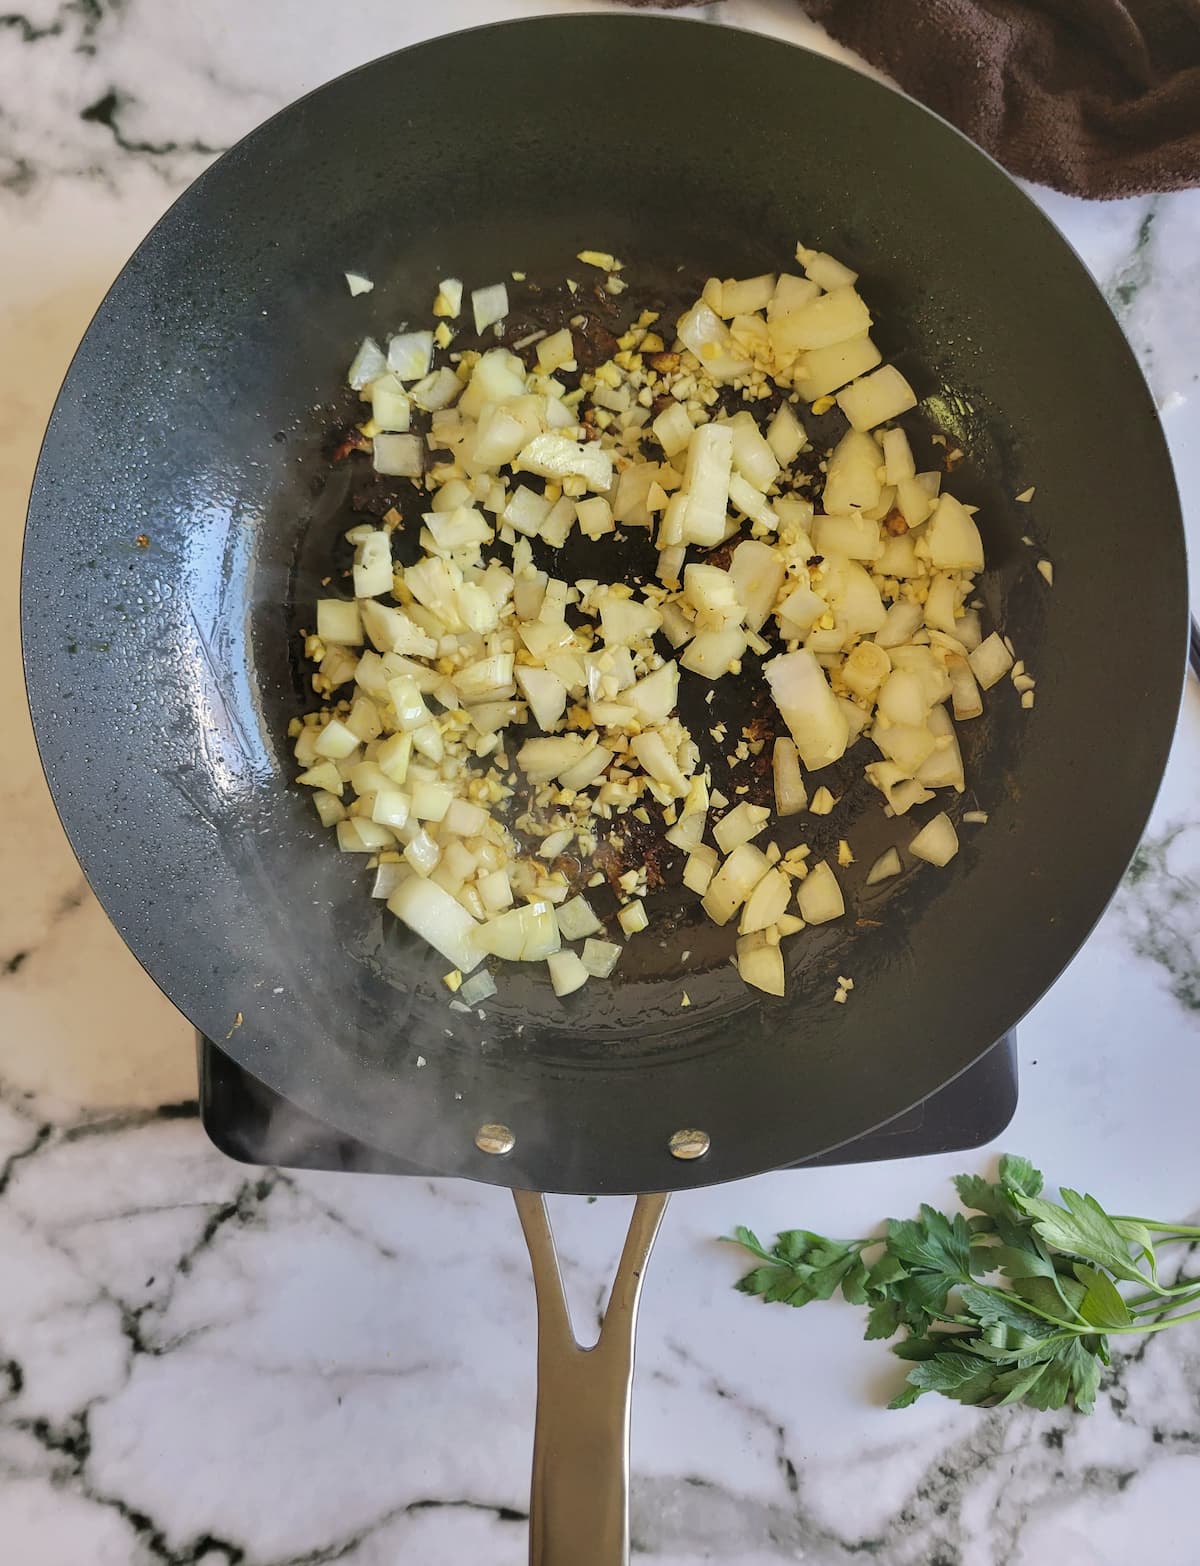 diced white onion, minced garlic and ginger in a pan on a burner